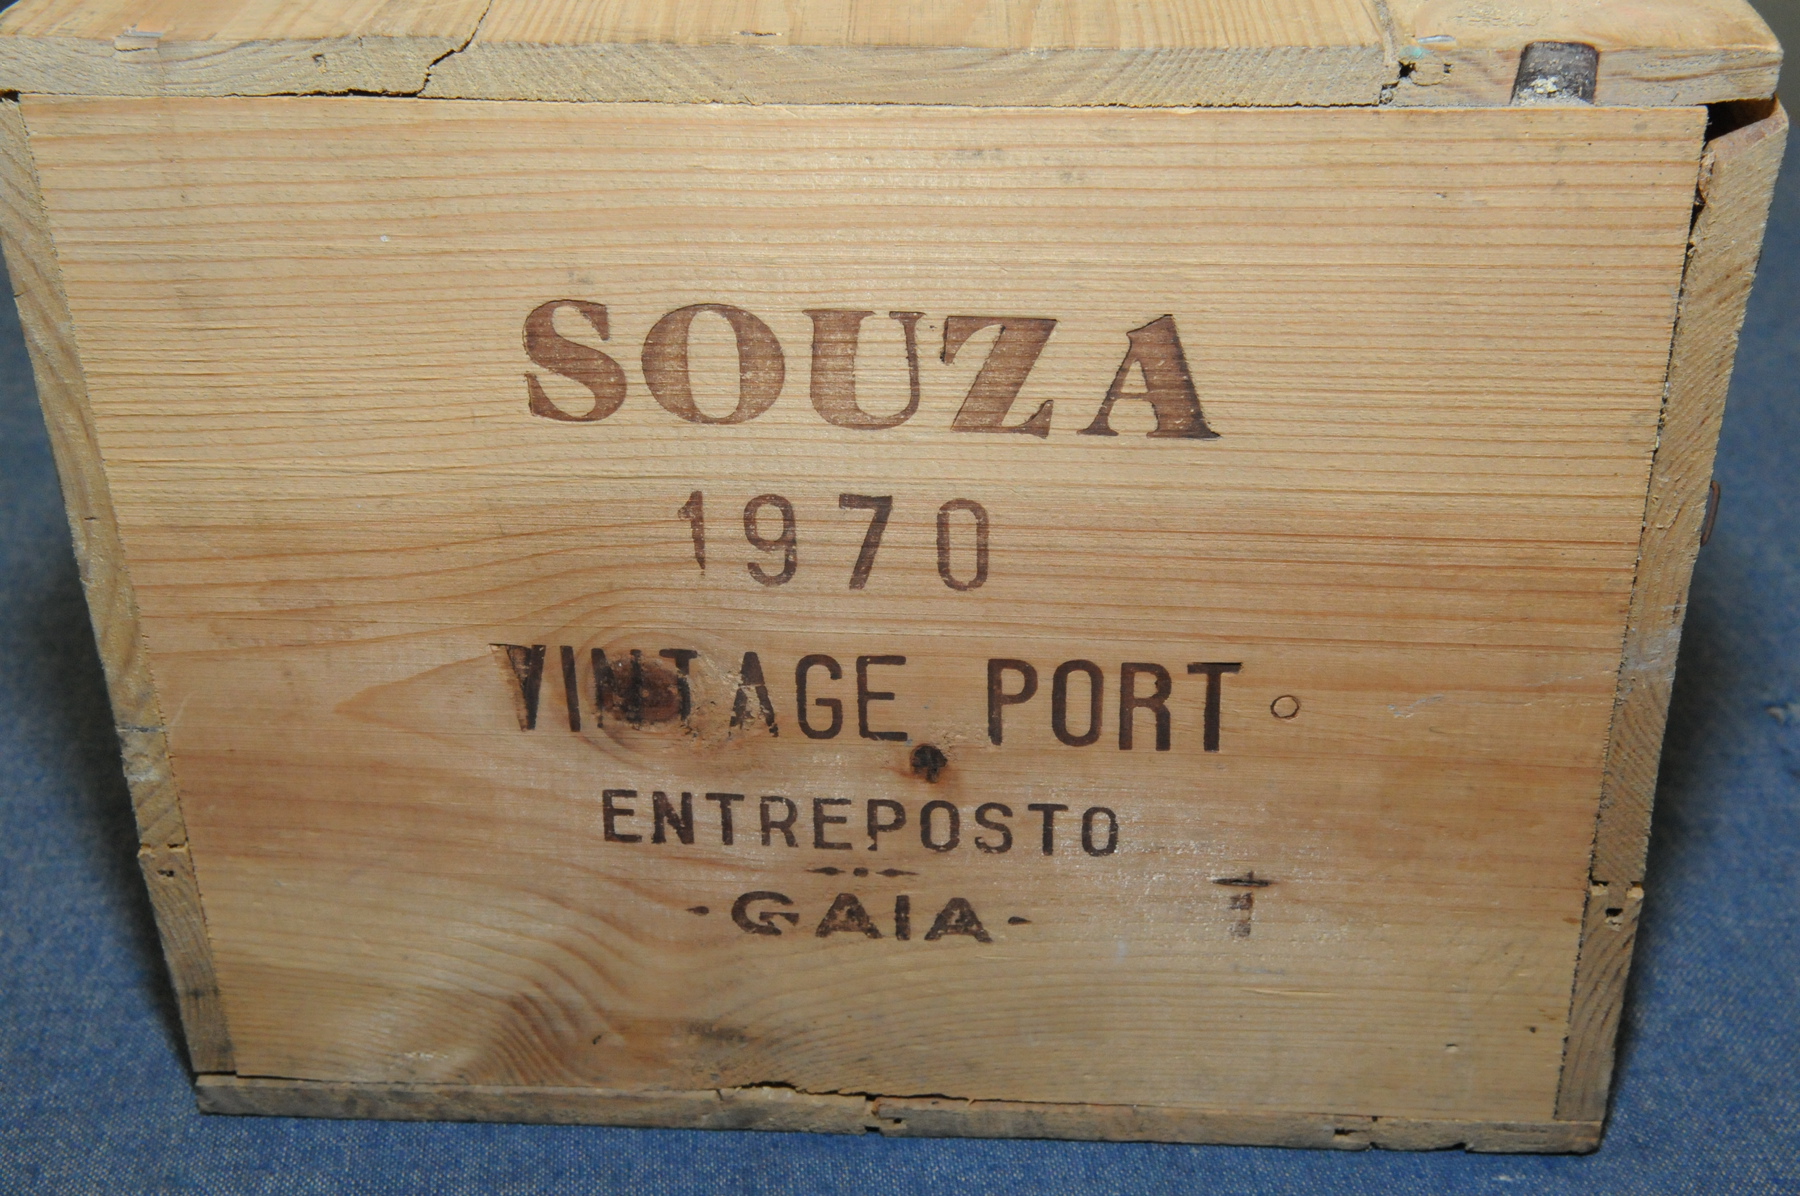 Twelve bottles of Souza 1970 Vintage Port contained in unopened wooden case with labels and stamps.